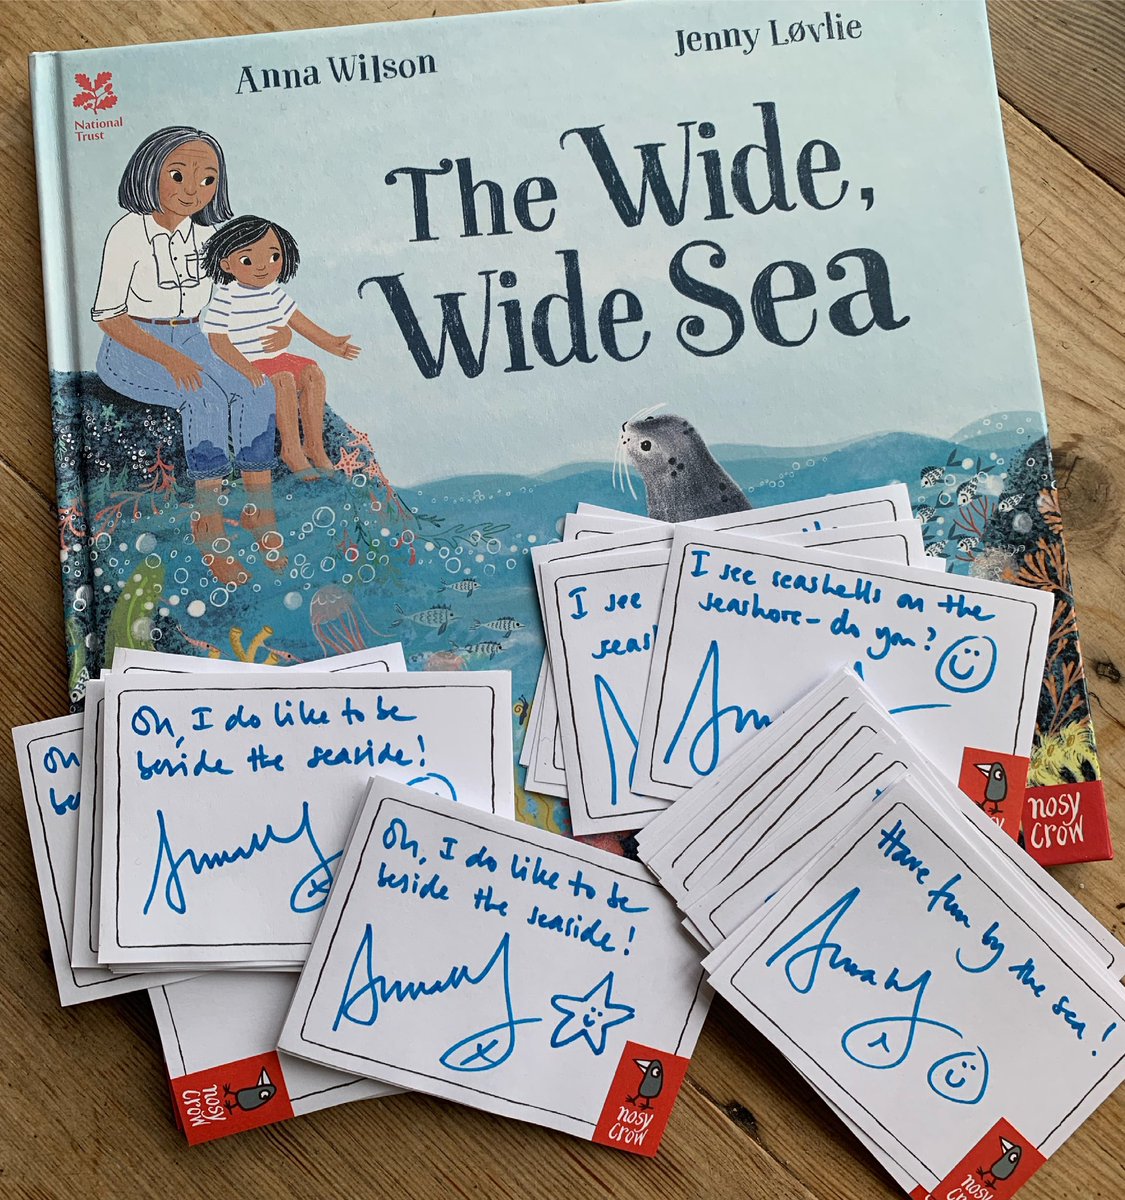 Signing bookplates for #thewidewidesea. Soon to be released into the wild! @NosyCrow @TALLAgent @NTBooks @JennyLovlie